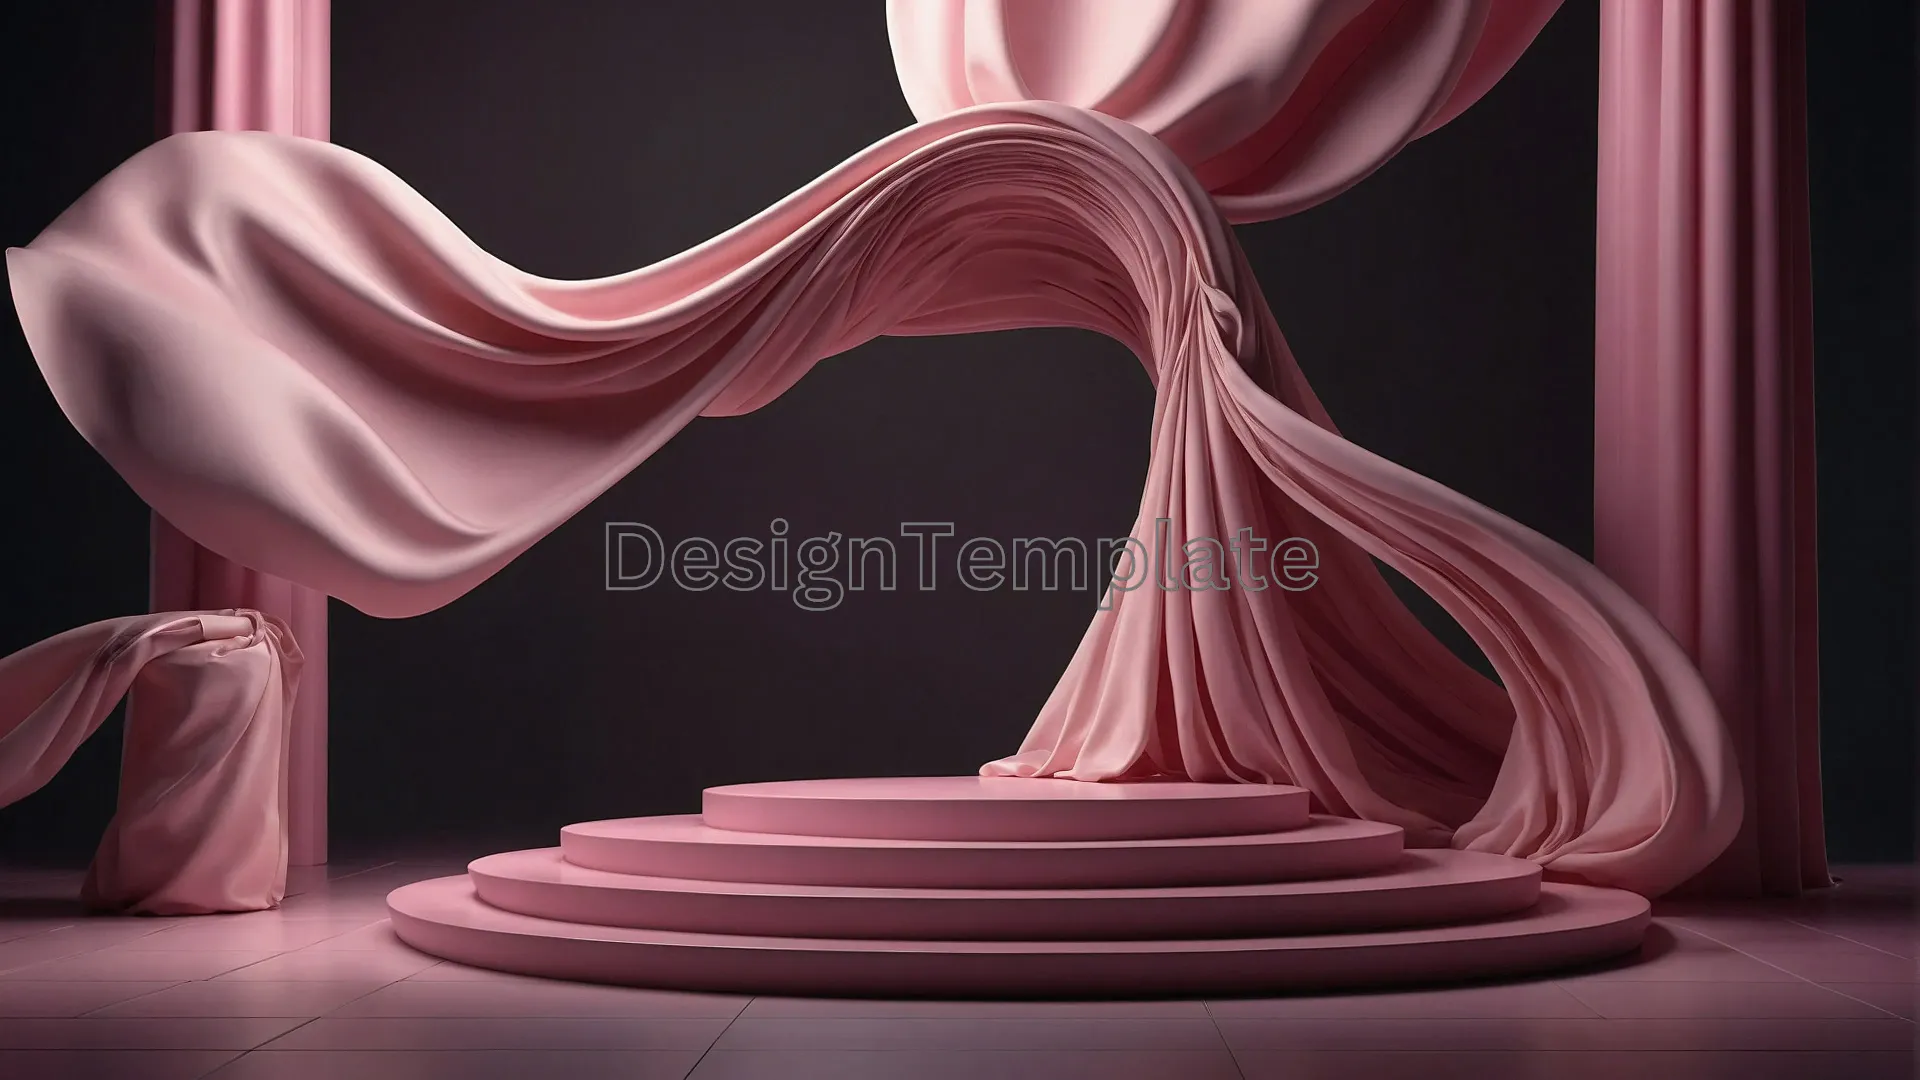 New 3D Podium with Draped Pink Cloth Image image